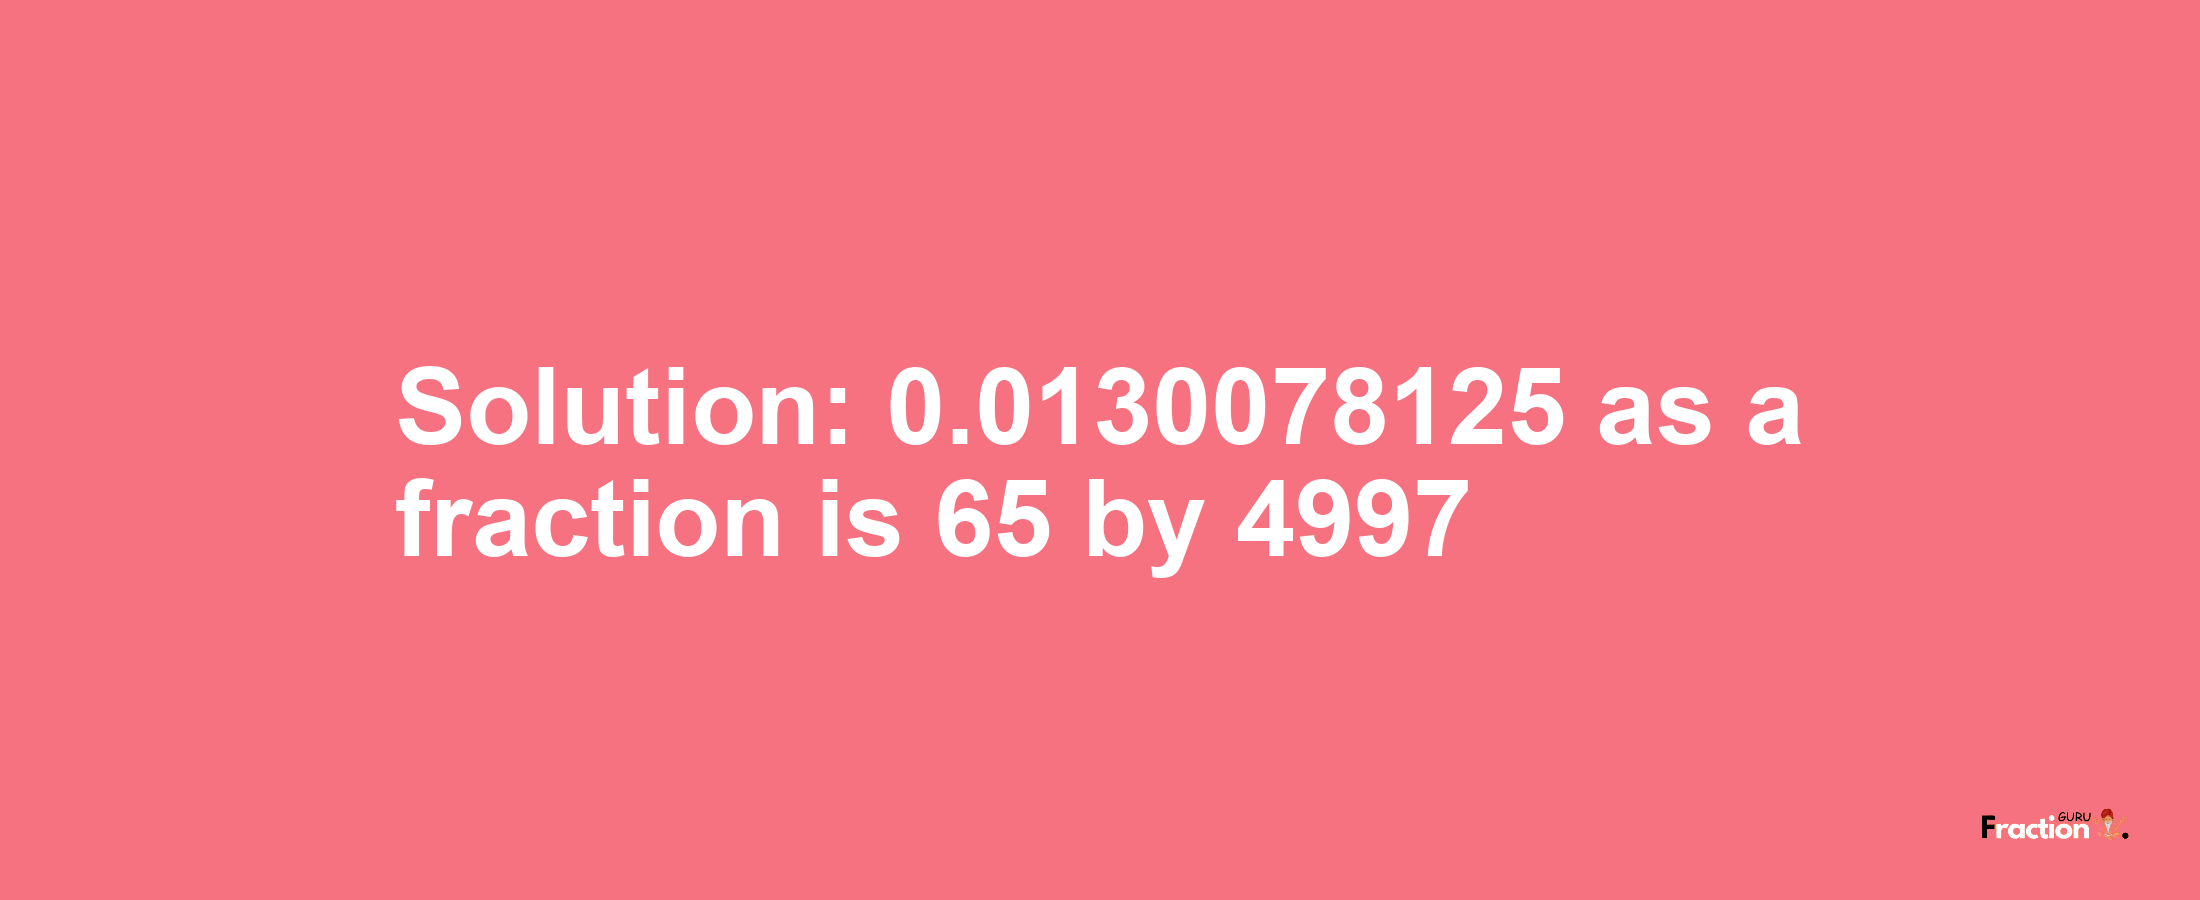 Solution:0.0130078125 as a fraction is 65/4997